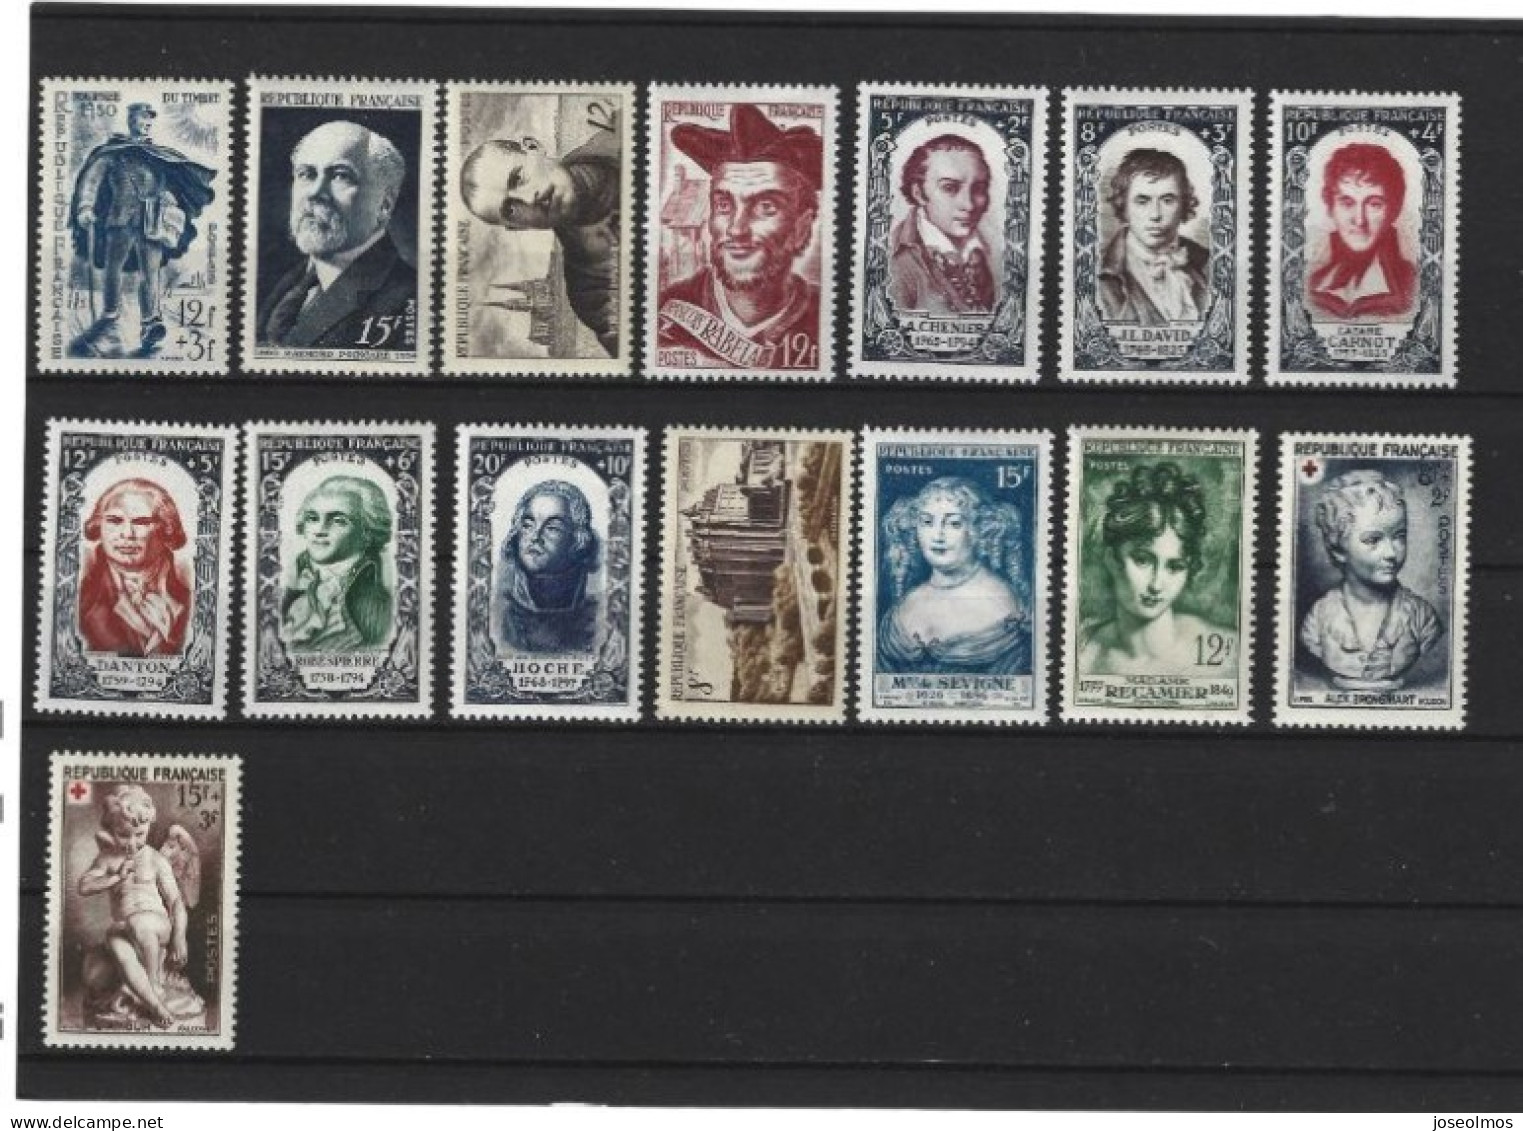 TIMBRES FRANCE ANNEE COMPLETE 1950 NEUF** LUXE - 1950-1959